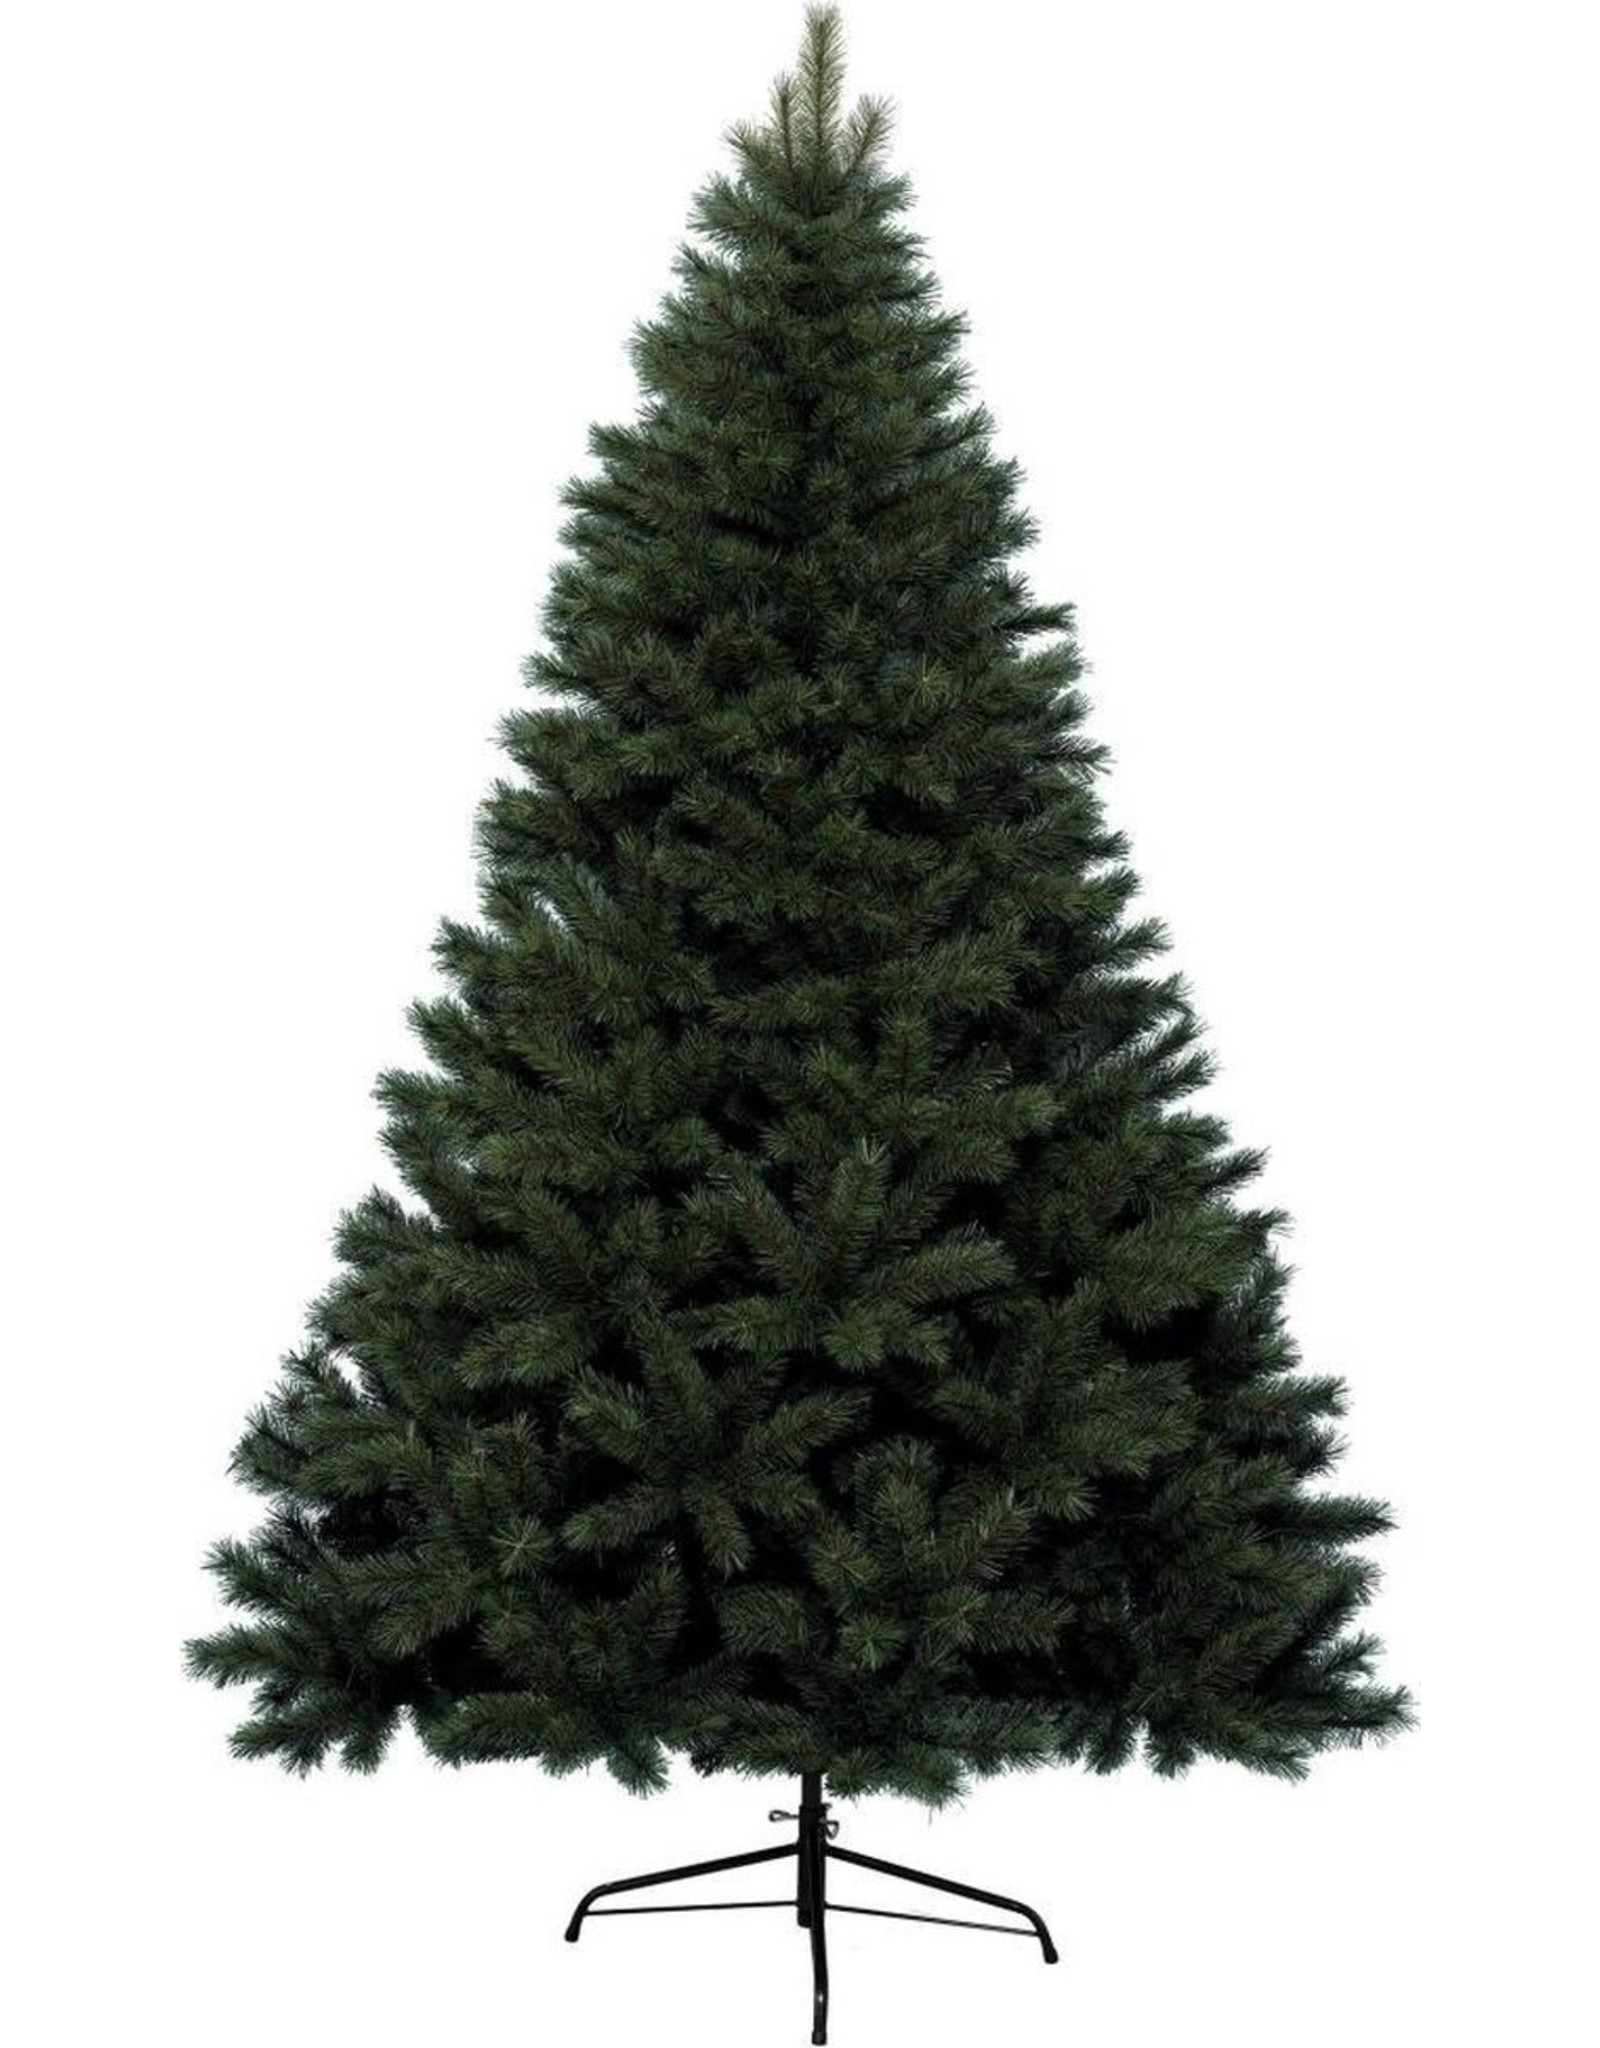 Everlands - Christmas Tree - Without Lighting - 210cm